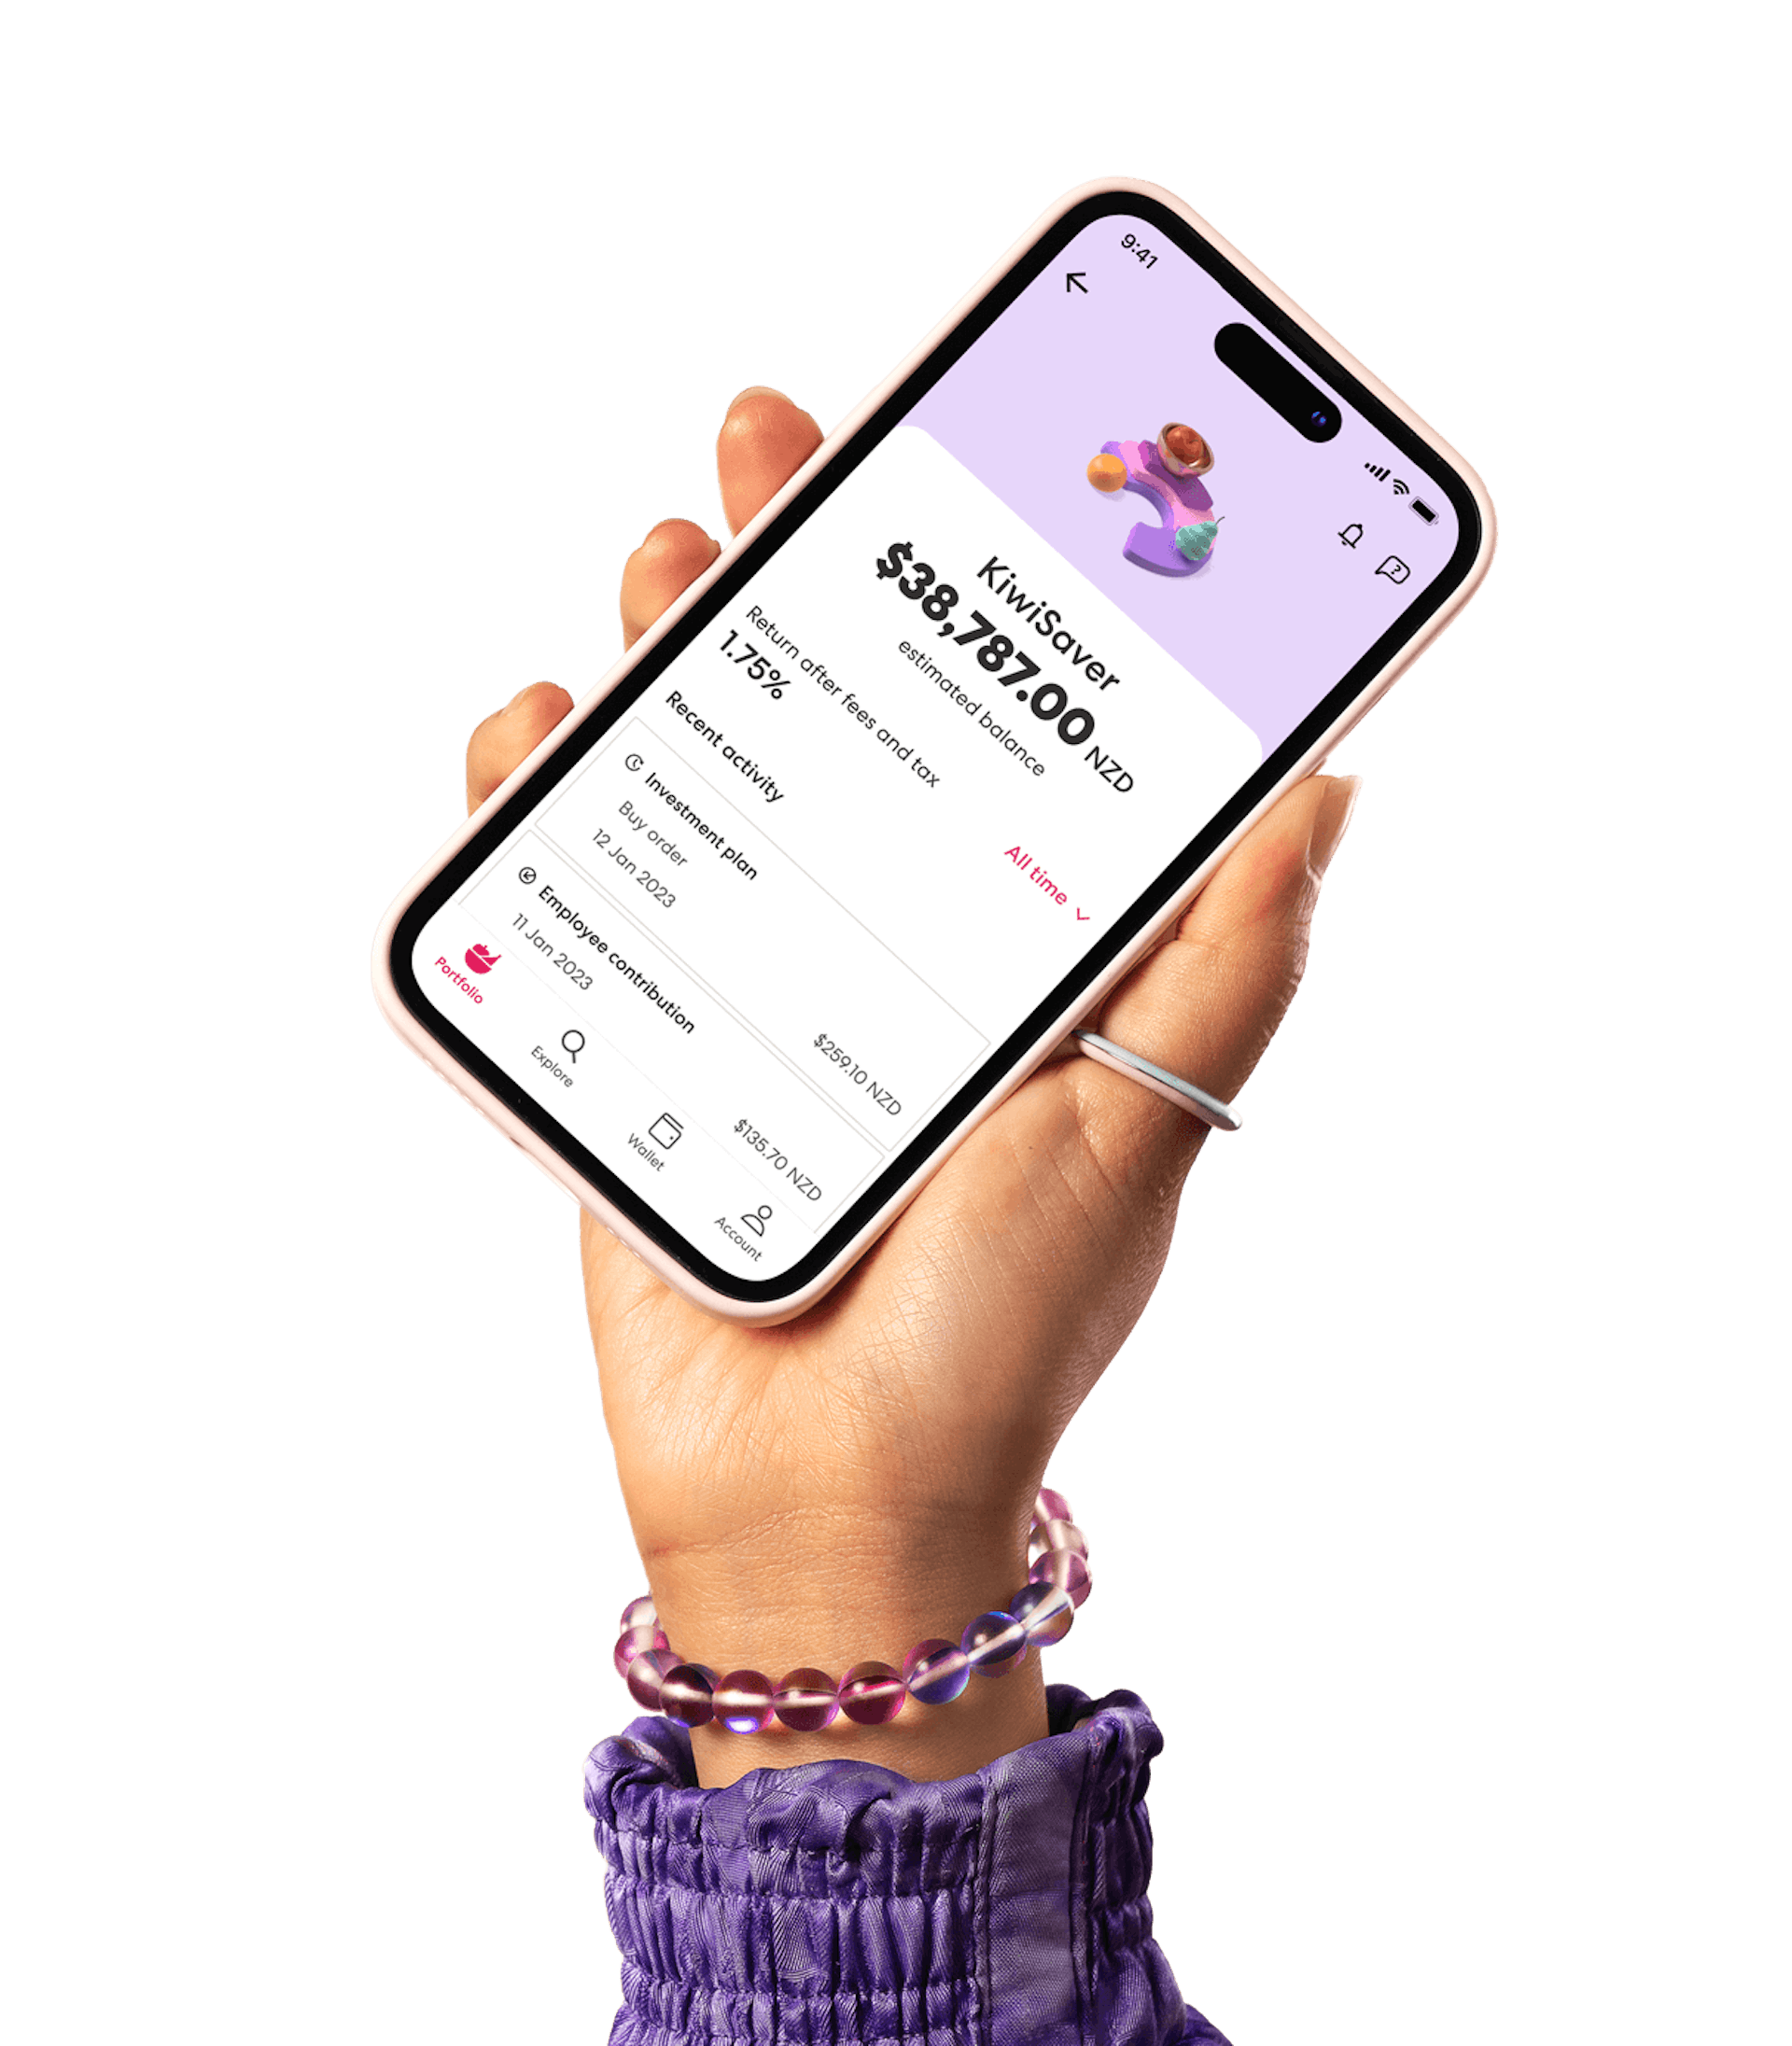 A hand holds an iPhone showing the Sharesies app. The screen displays a KiwiSaver portfolio with a balance of $20,301.87 NZD and return of 1.75%.